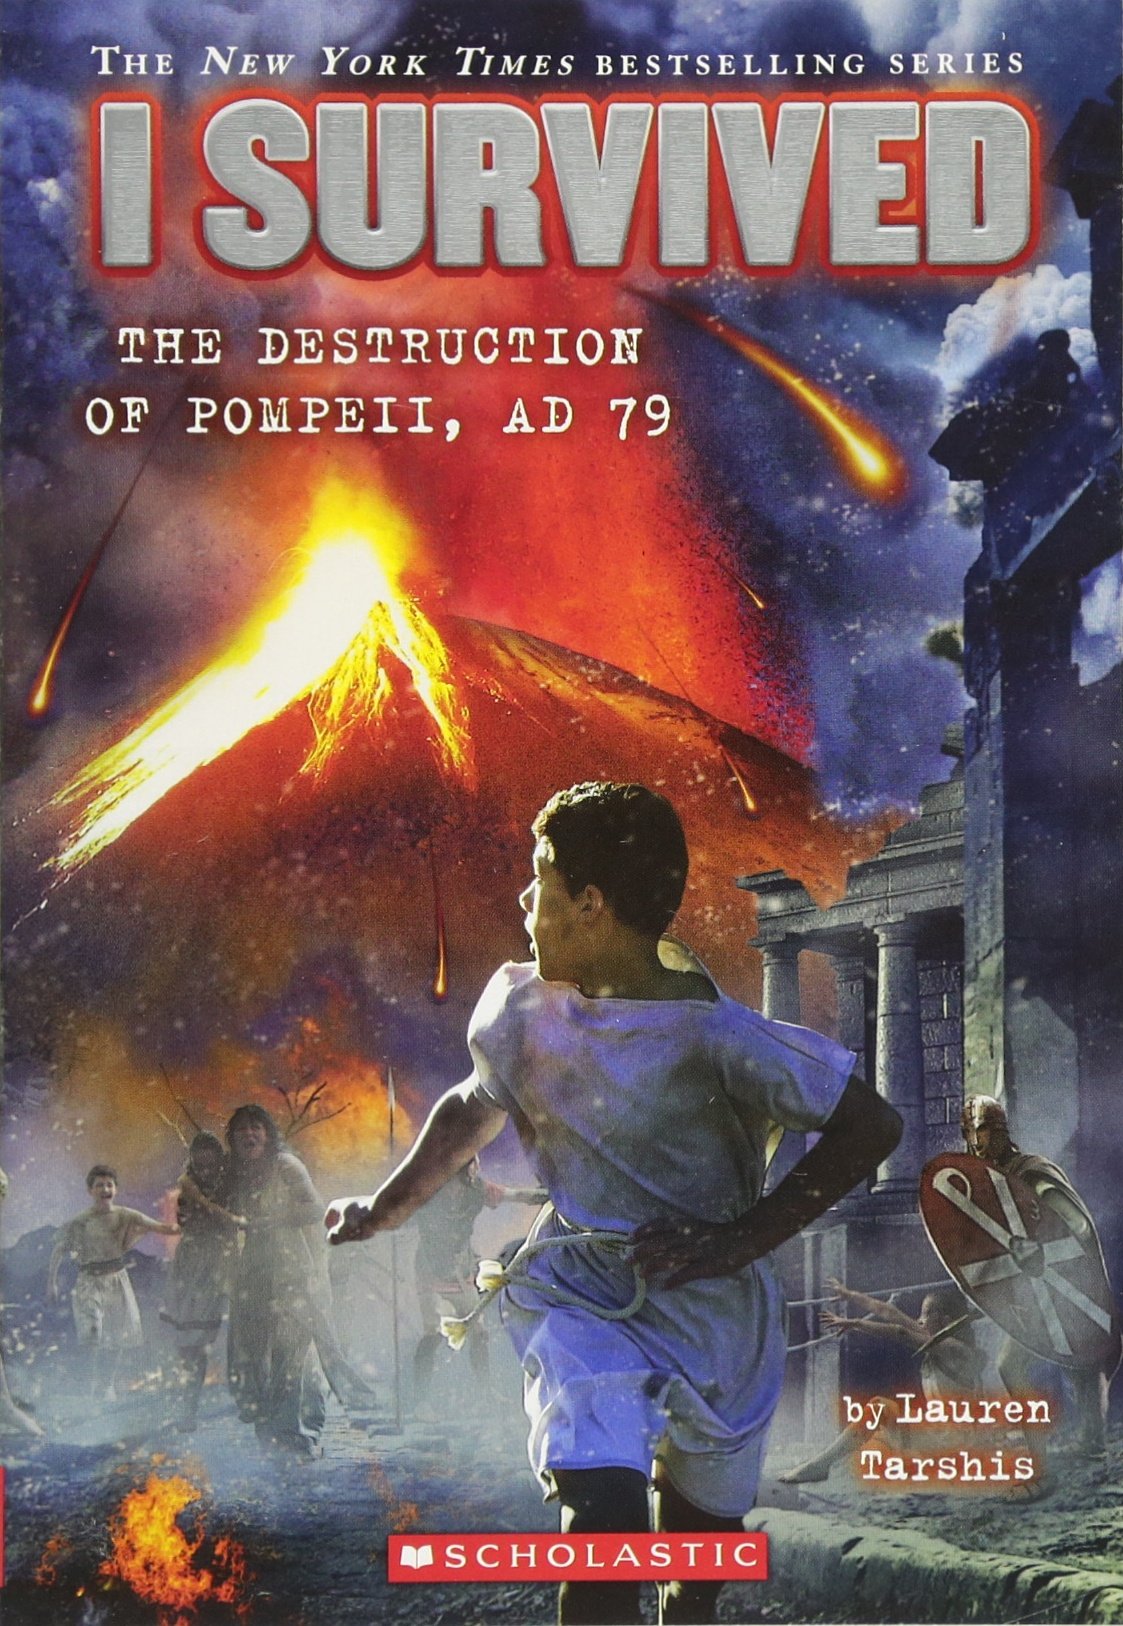 I Survived Book Covers The Destruction of Pompeii, AD 79